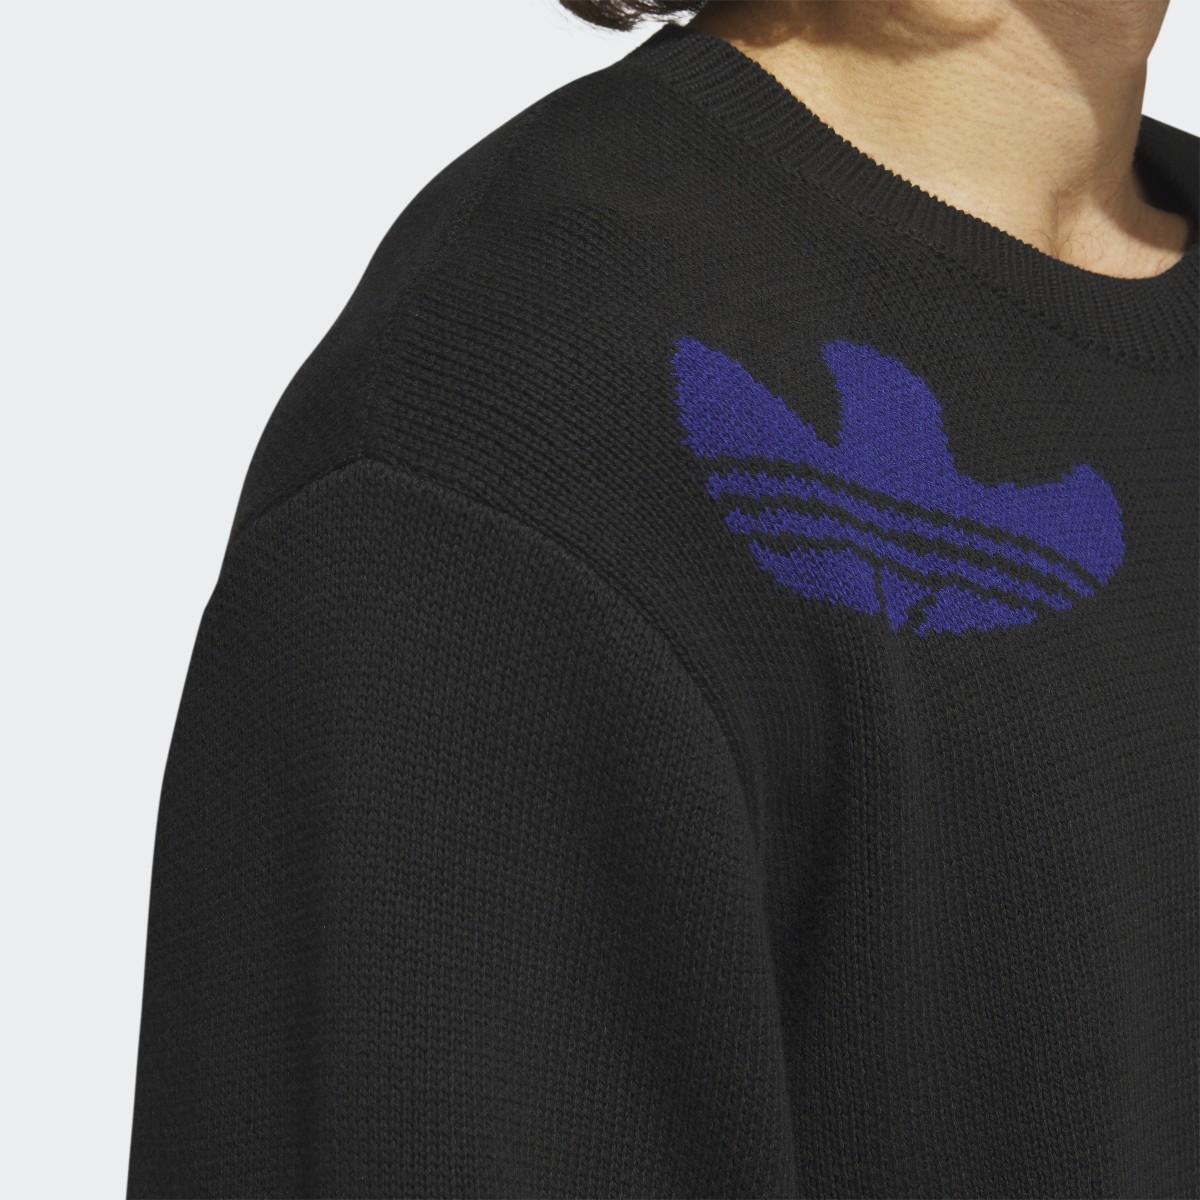 Adidas Shmoofoil Knit Sweater (Gender Neutral). 8